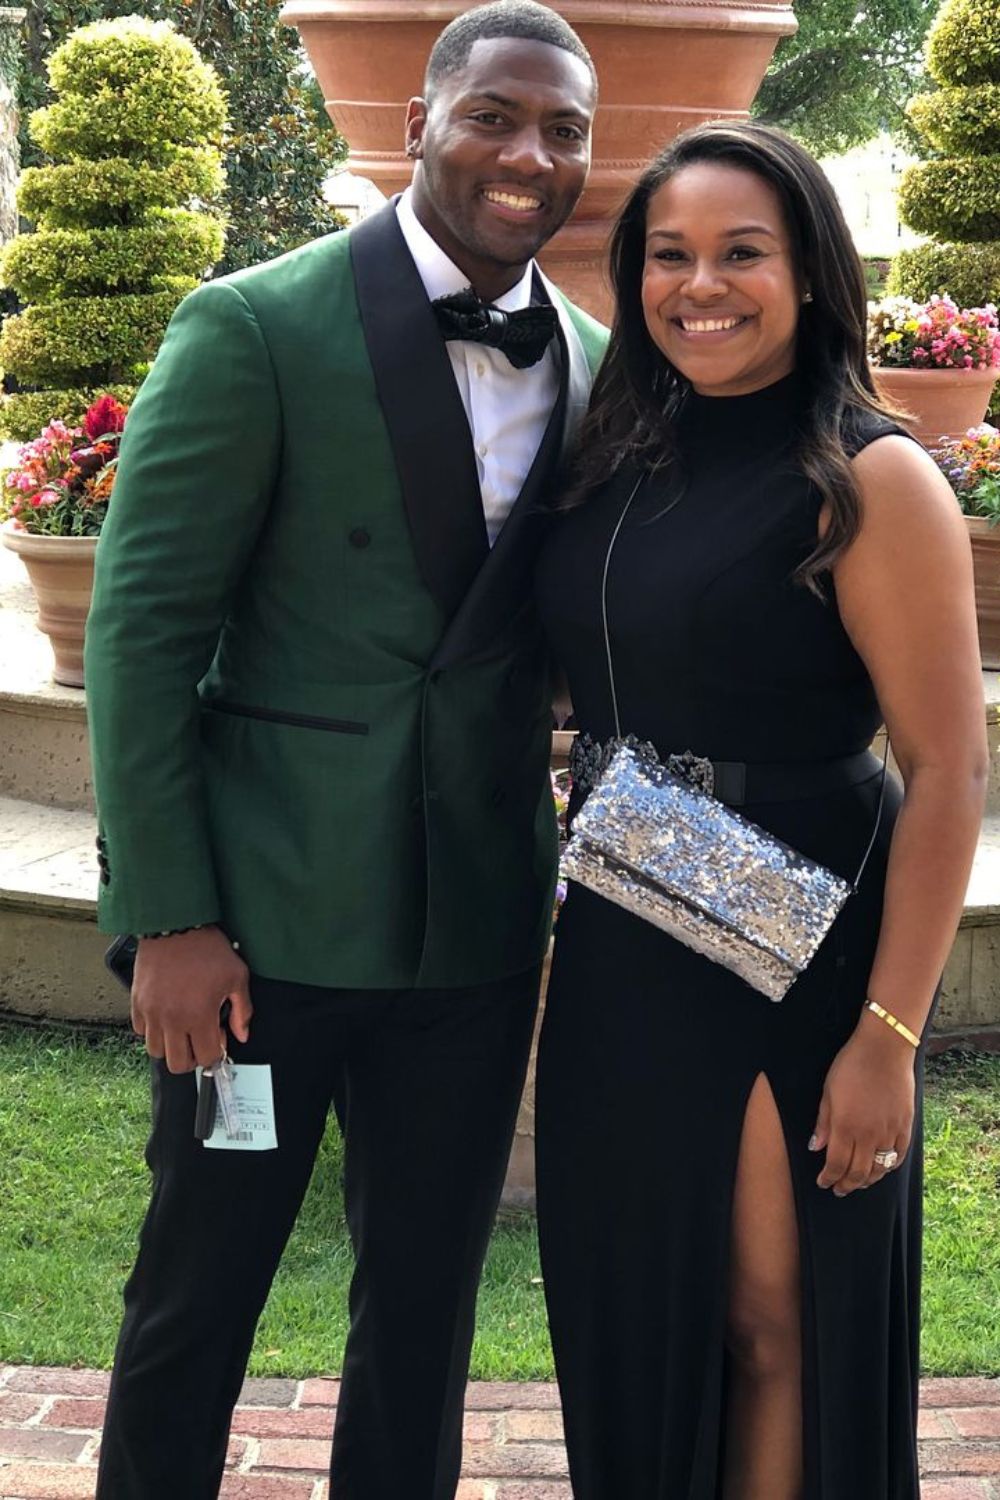 Yonka Clark With Her Husband Ryan Clark, A Former NFL Player-Turned-Analyst